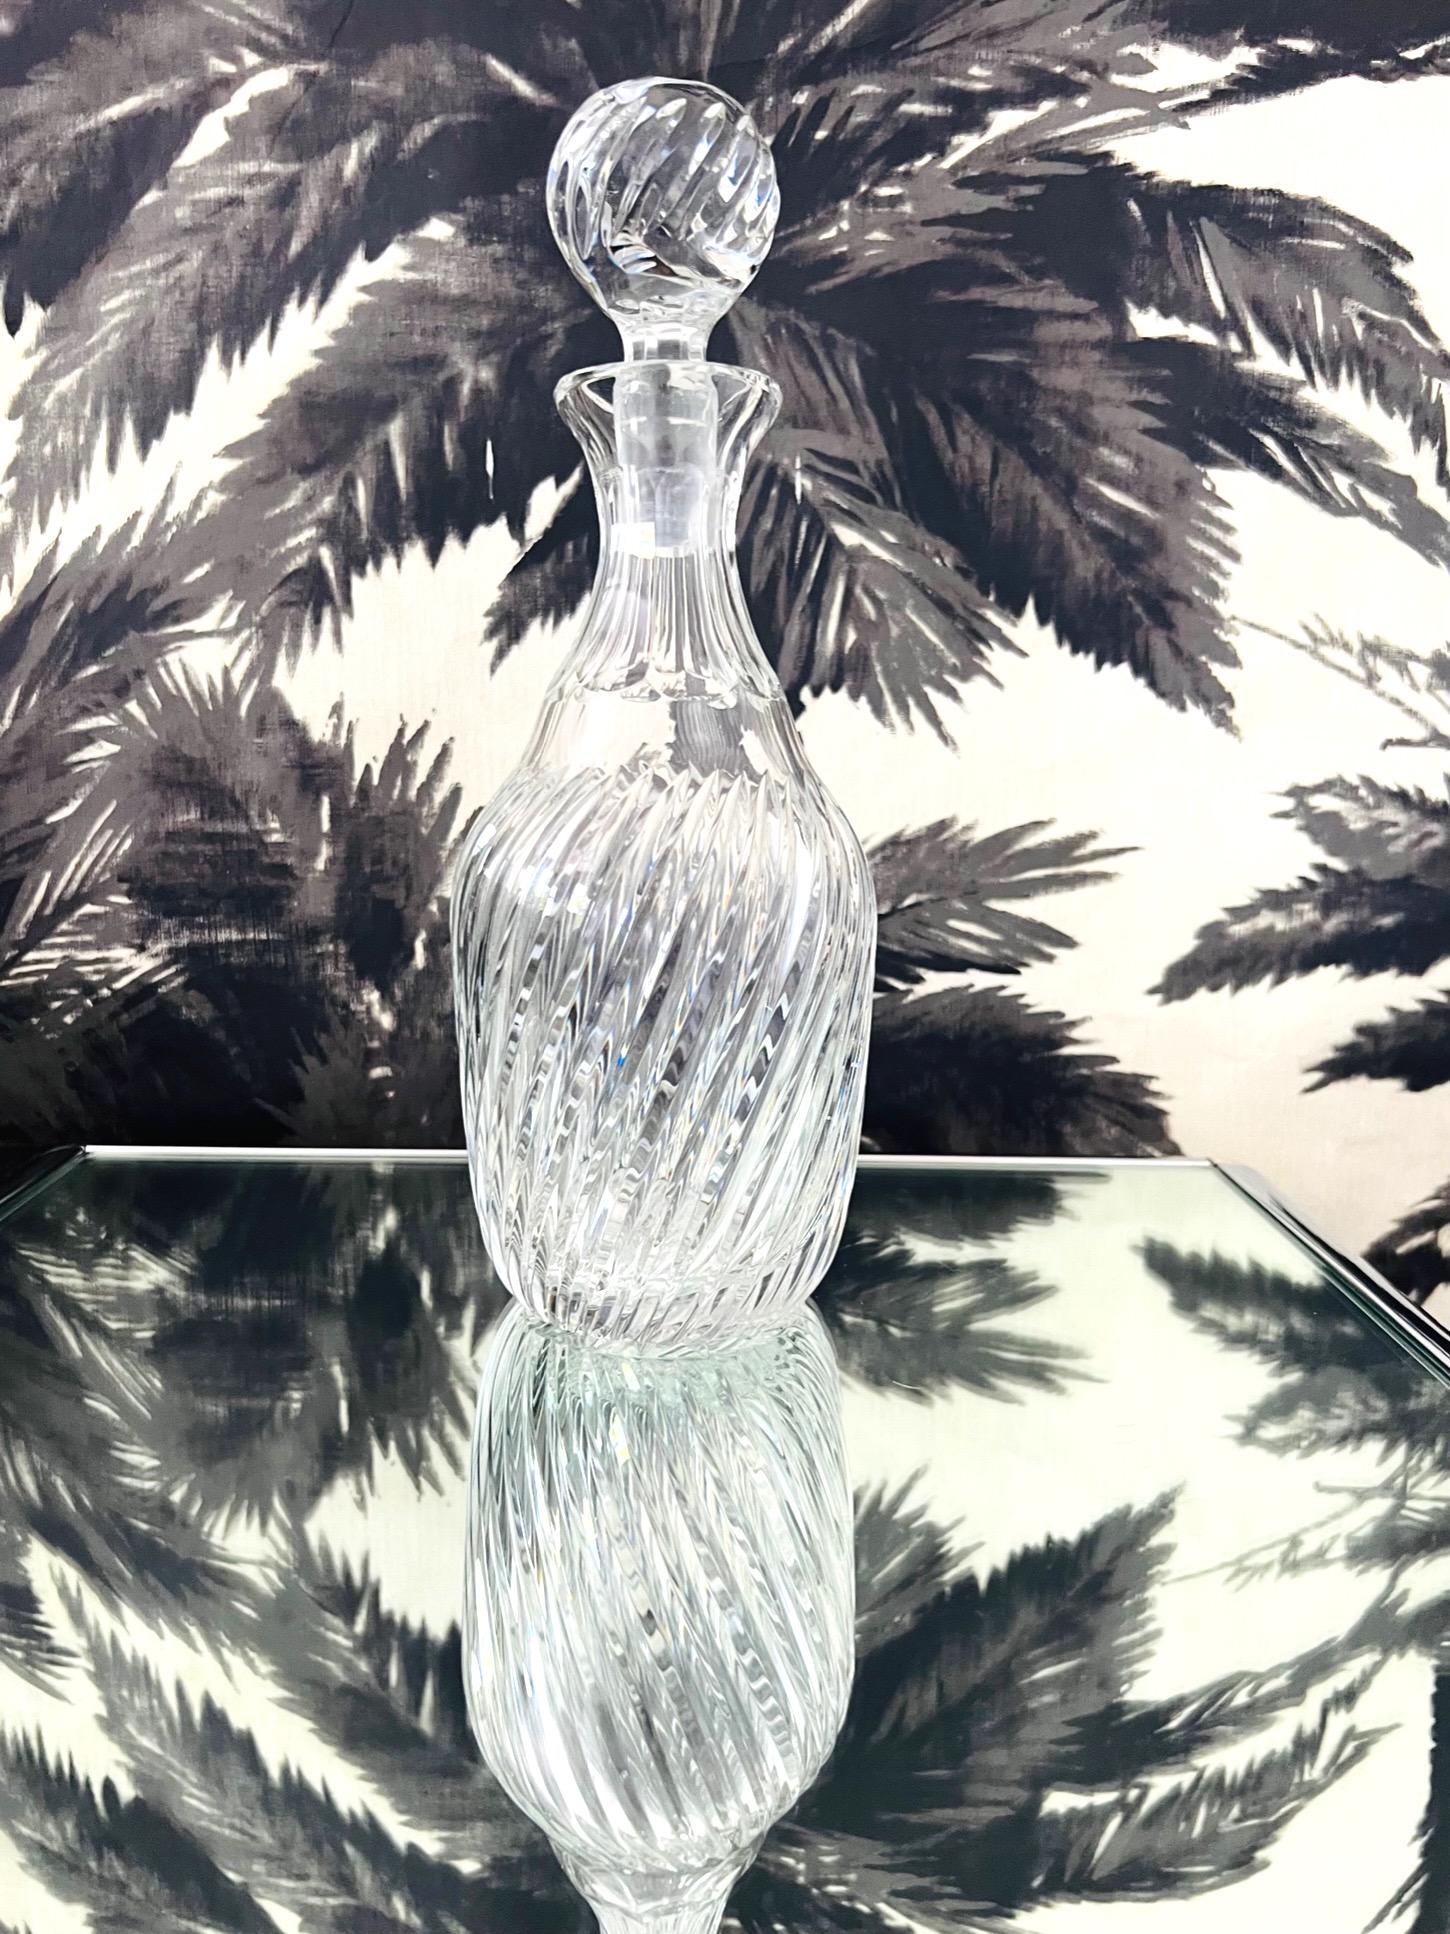 Polished Vintage French Crystal Decanter with Hand-Cut Swirl Designs, c. 1970's